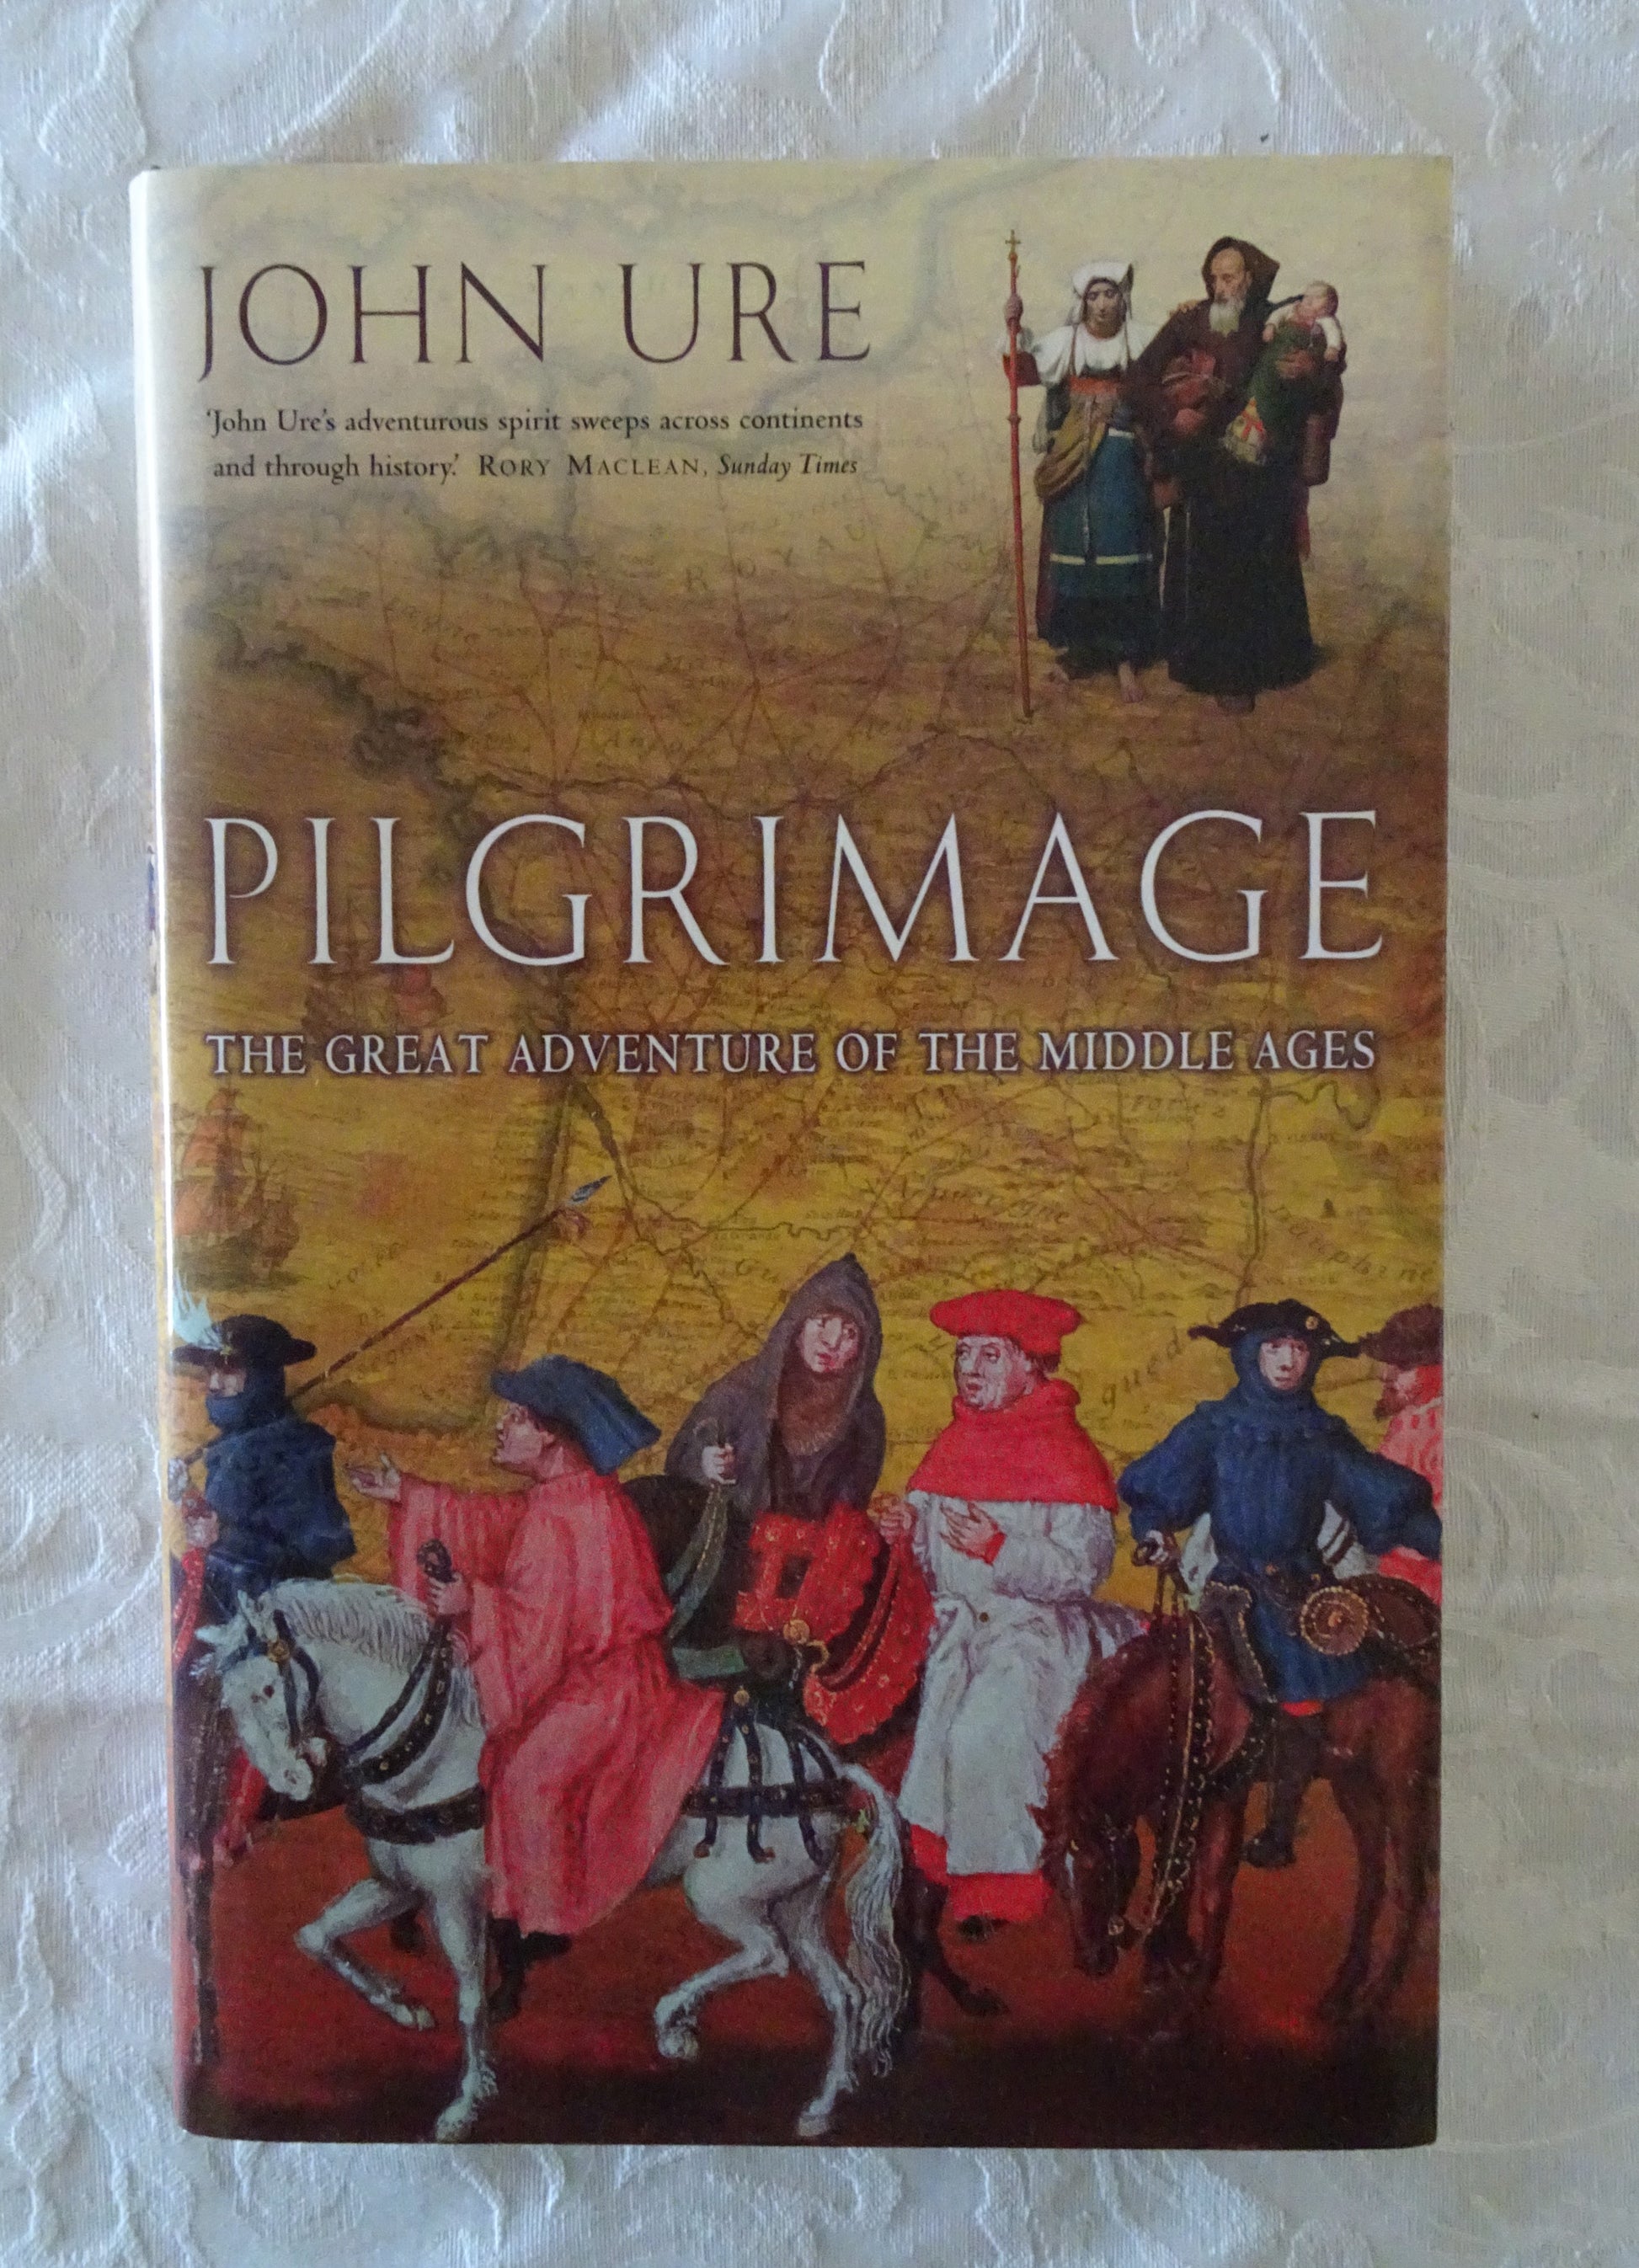 Pilgrimage  The Great Adventure of the Middle Ages  by John Ure